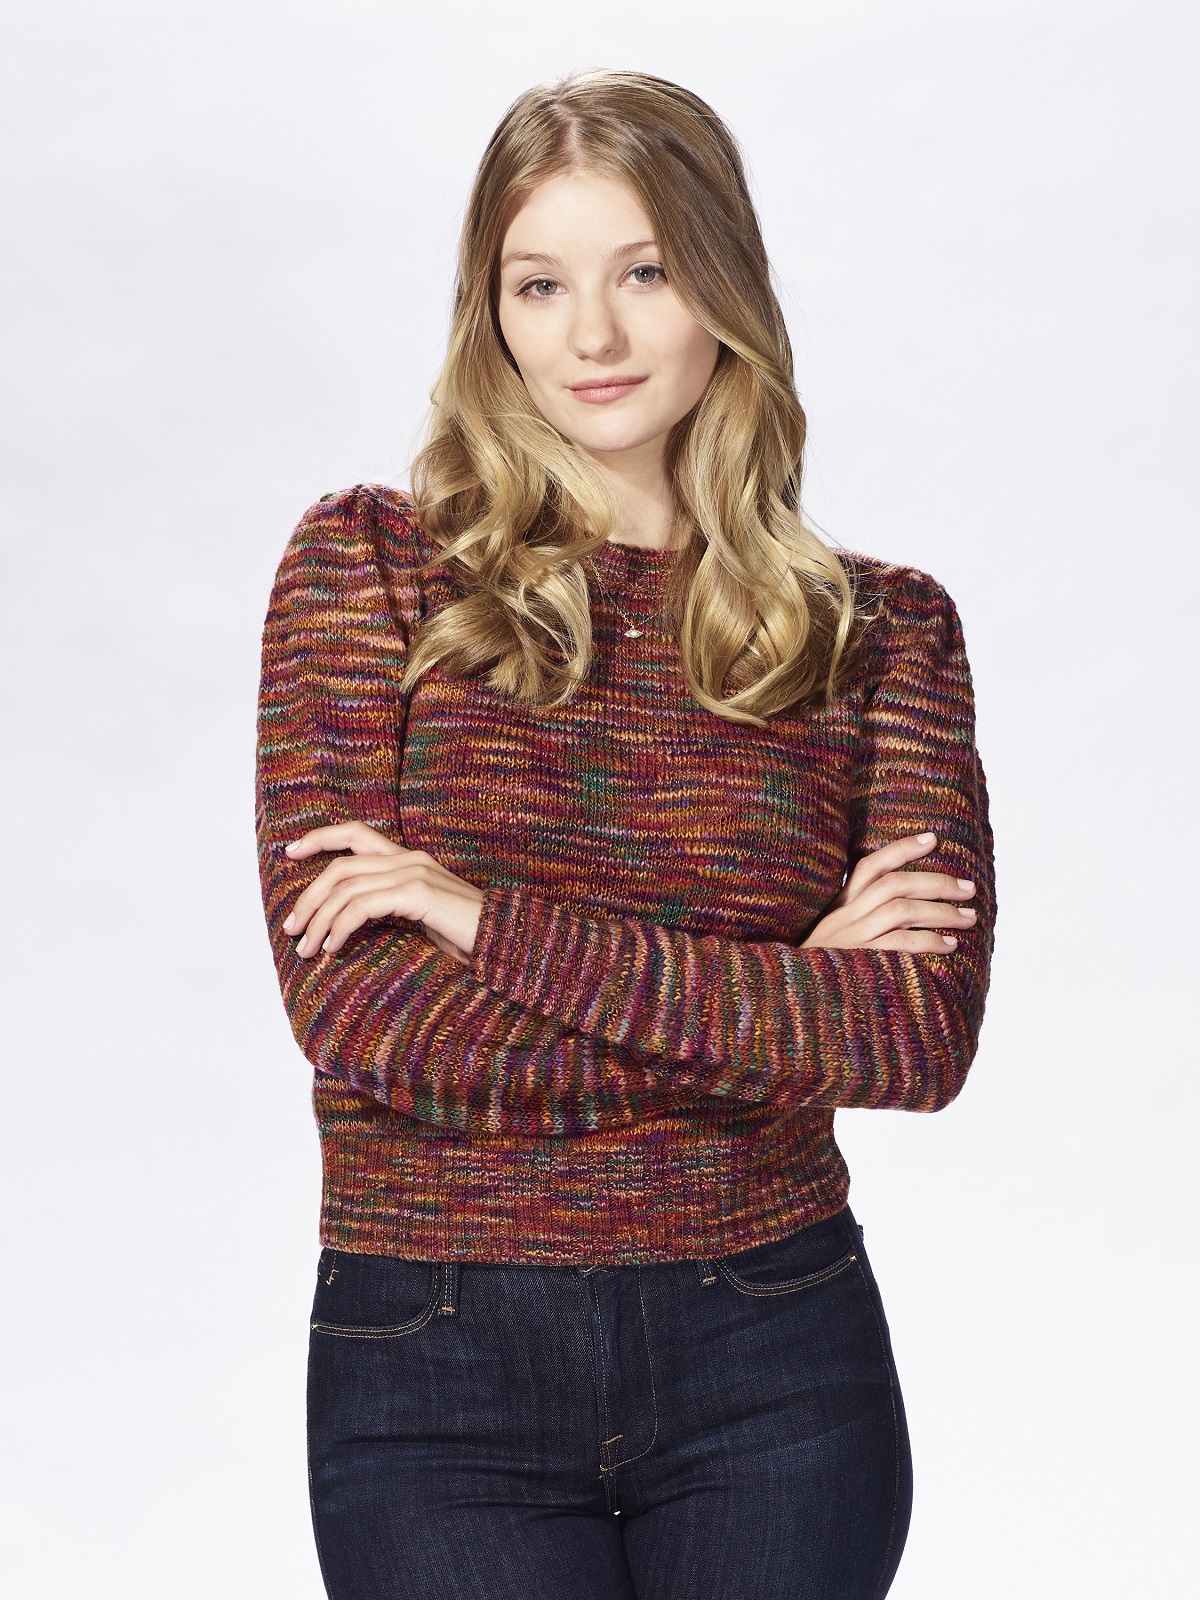 Actor Lindsay Arnold as her character Allie Horton in a promotional photo for 'Days of Our Lives'